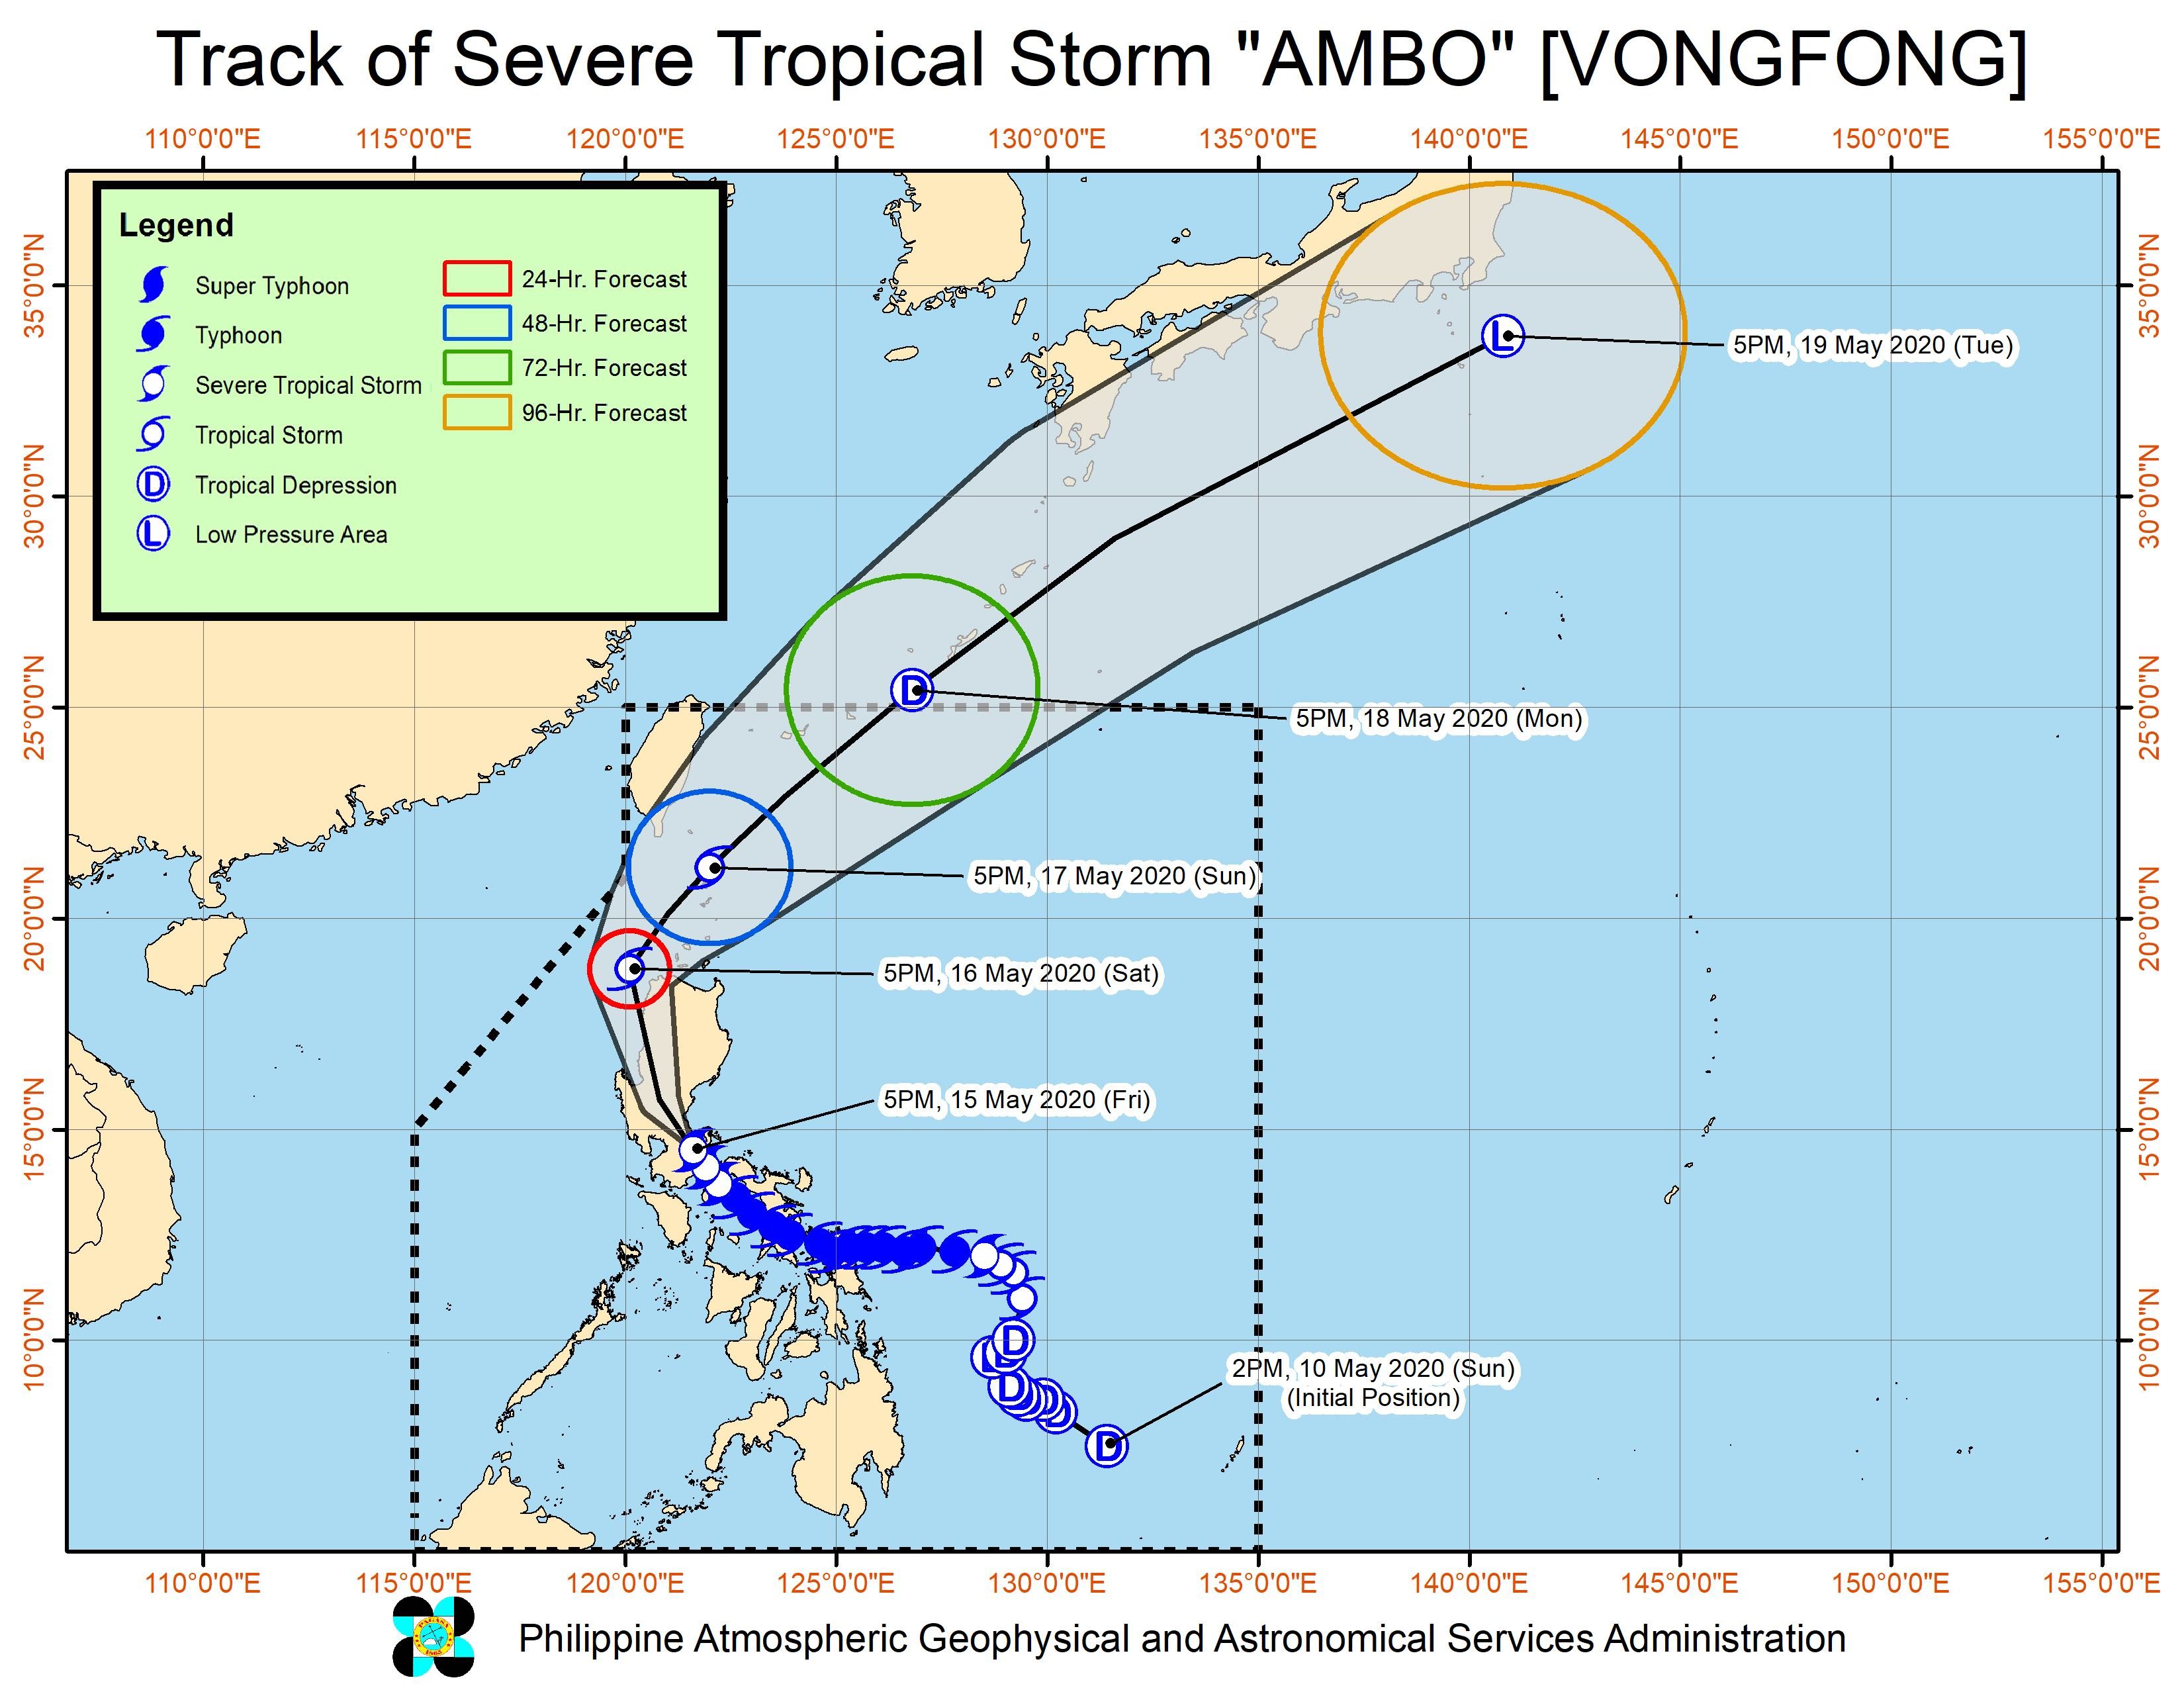 Forecast track of Severe Tropical Storm Ambo (Vongfong) as of May 15, 2020, 8 pm. Image from PAGASA 